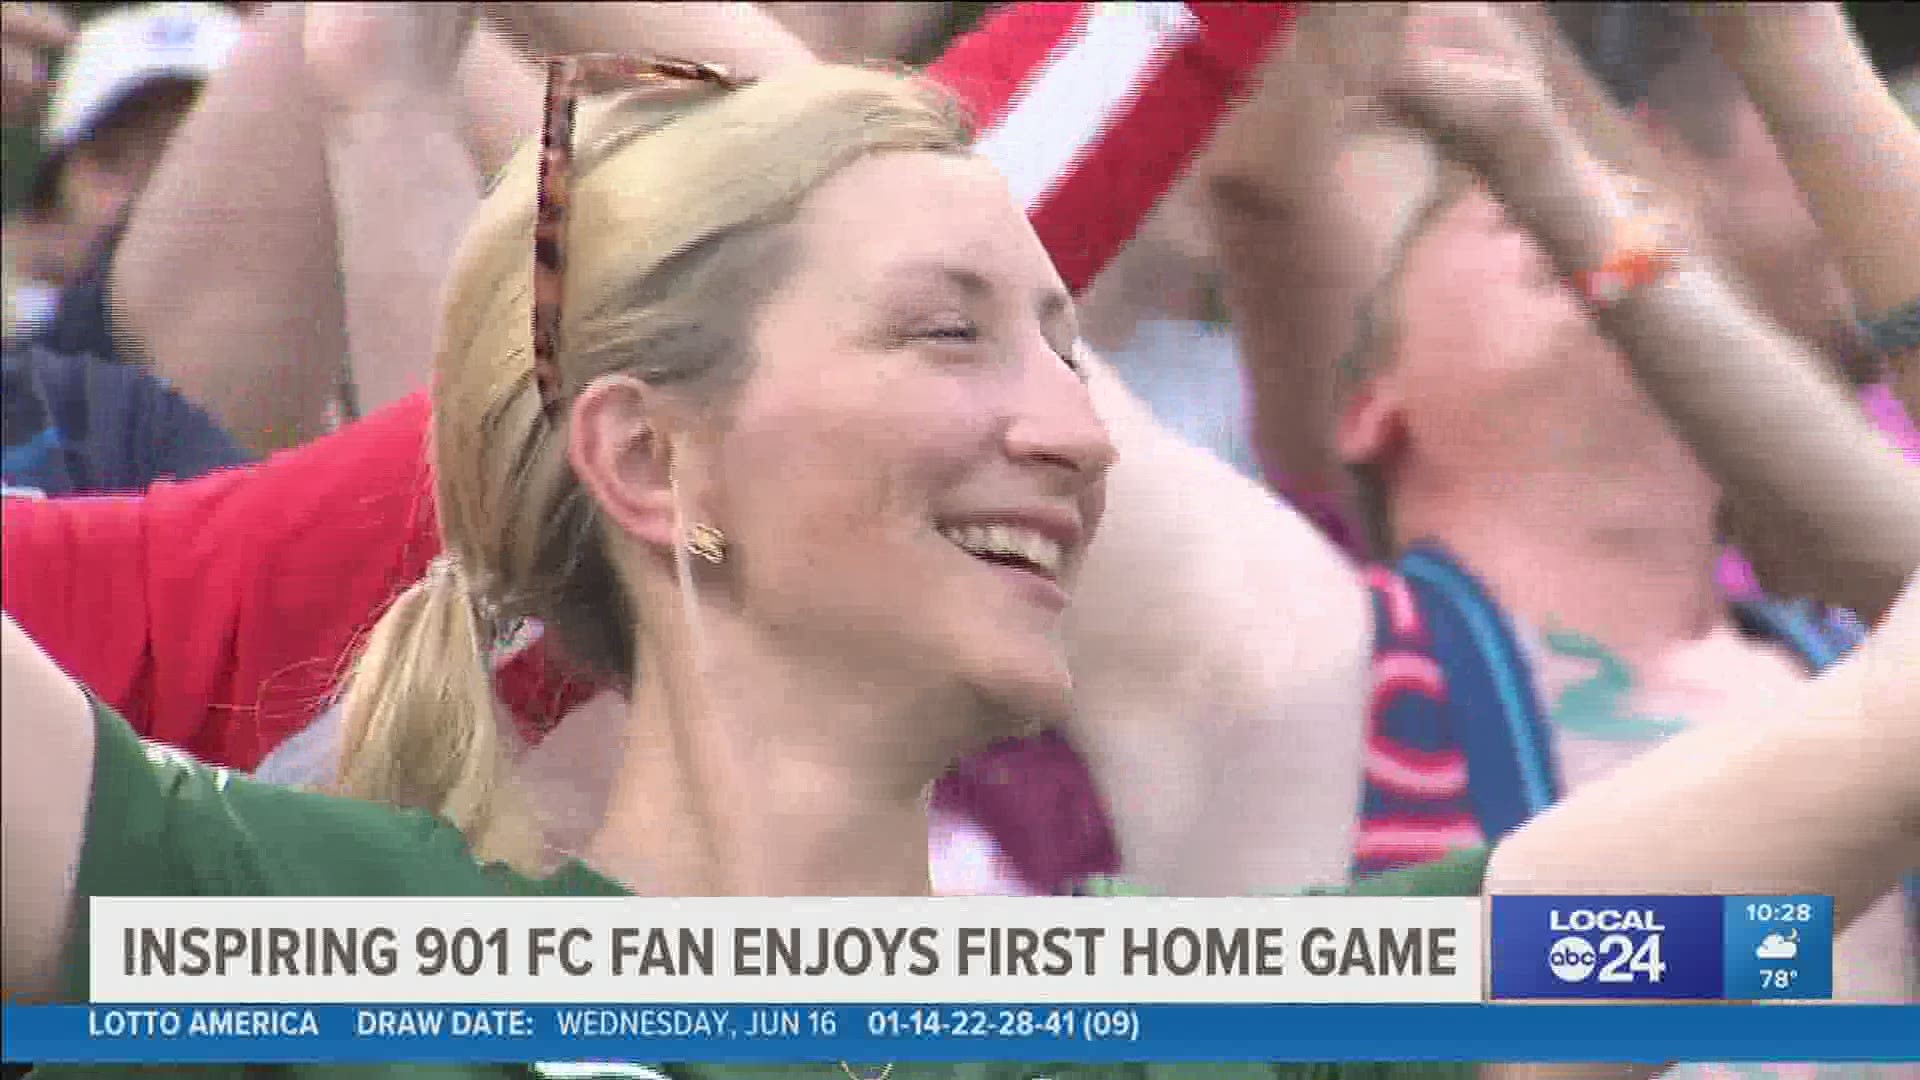 Magan Hall and her family finally got to go to a 901 FC home game, but it wasn't just COVID that kept her from going to any games before Wednesday.